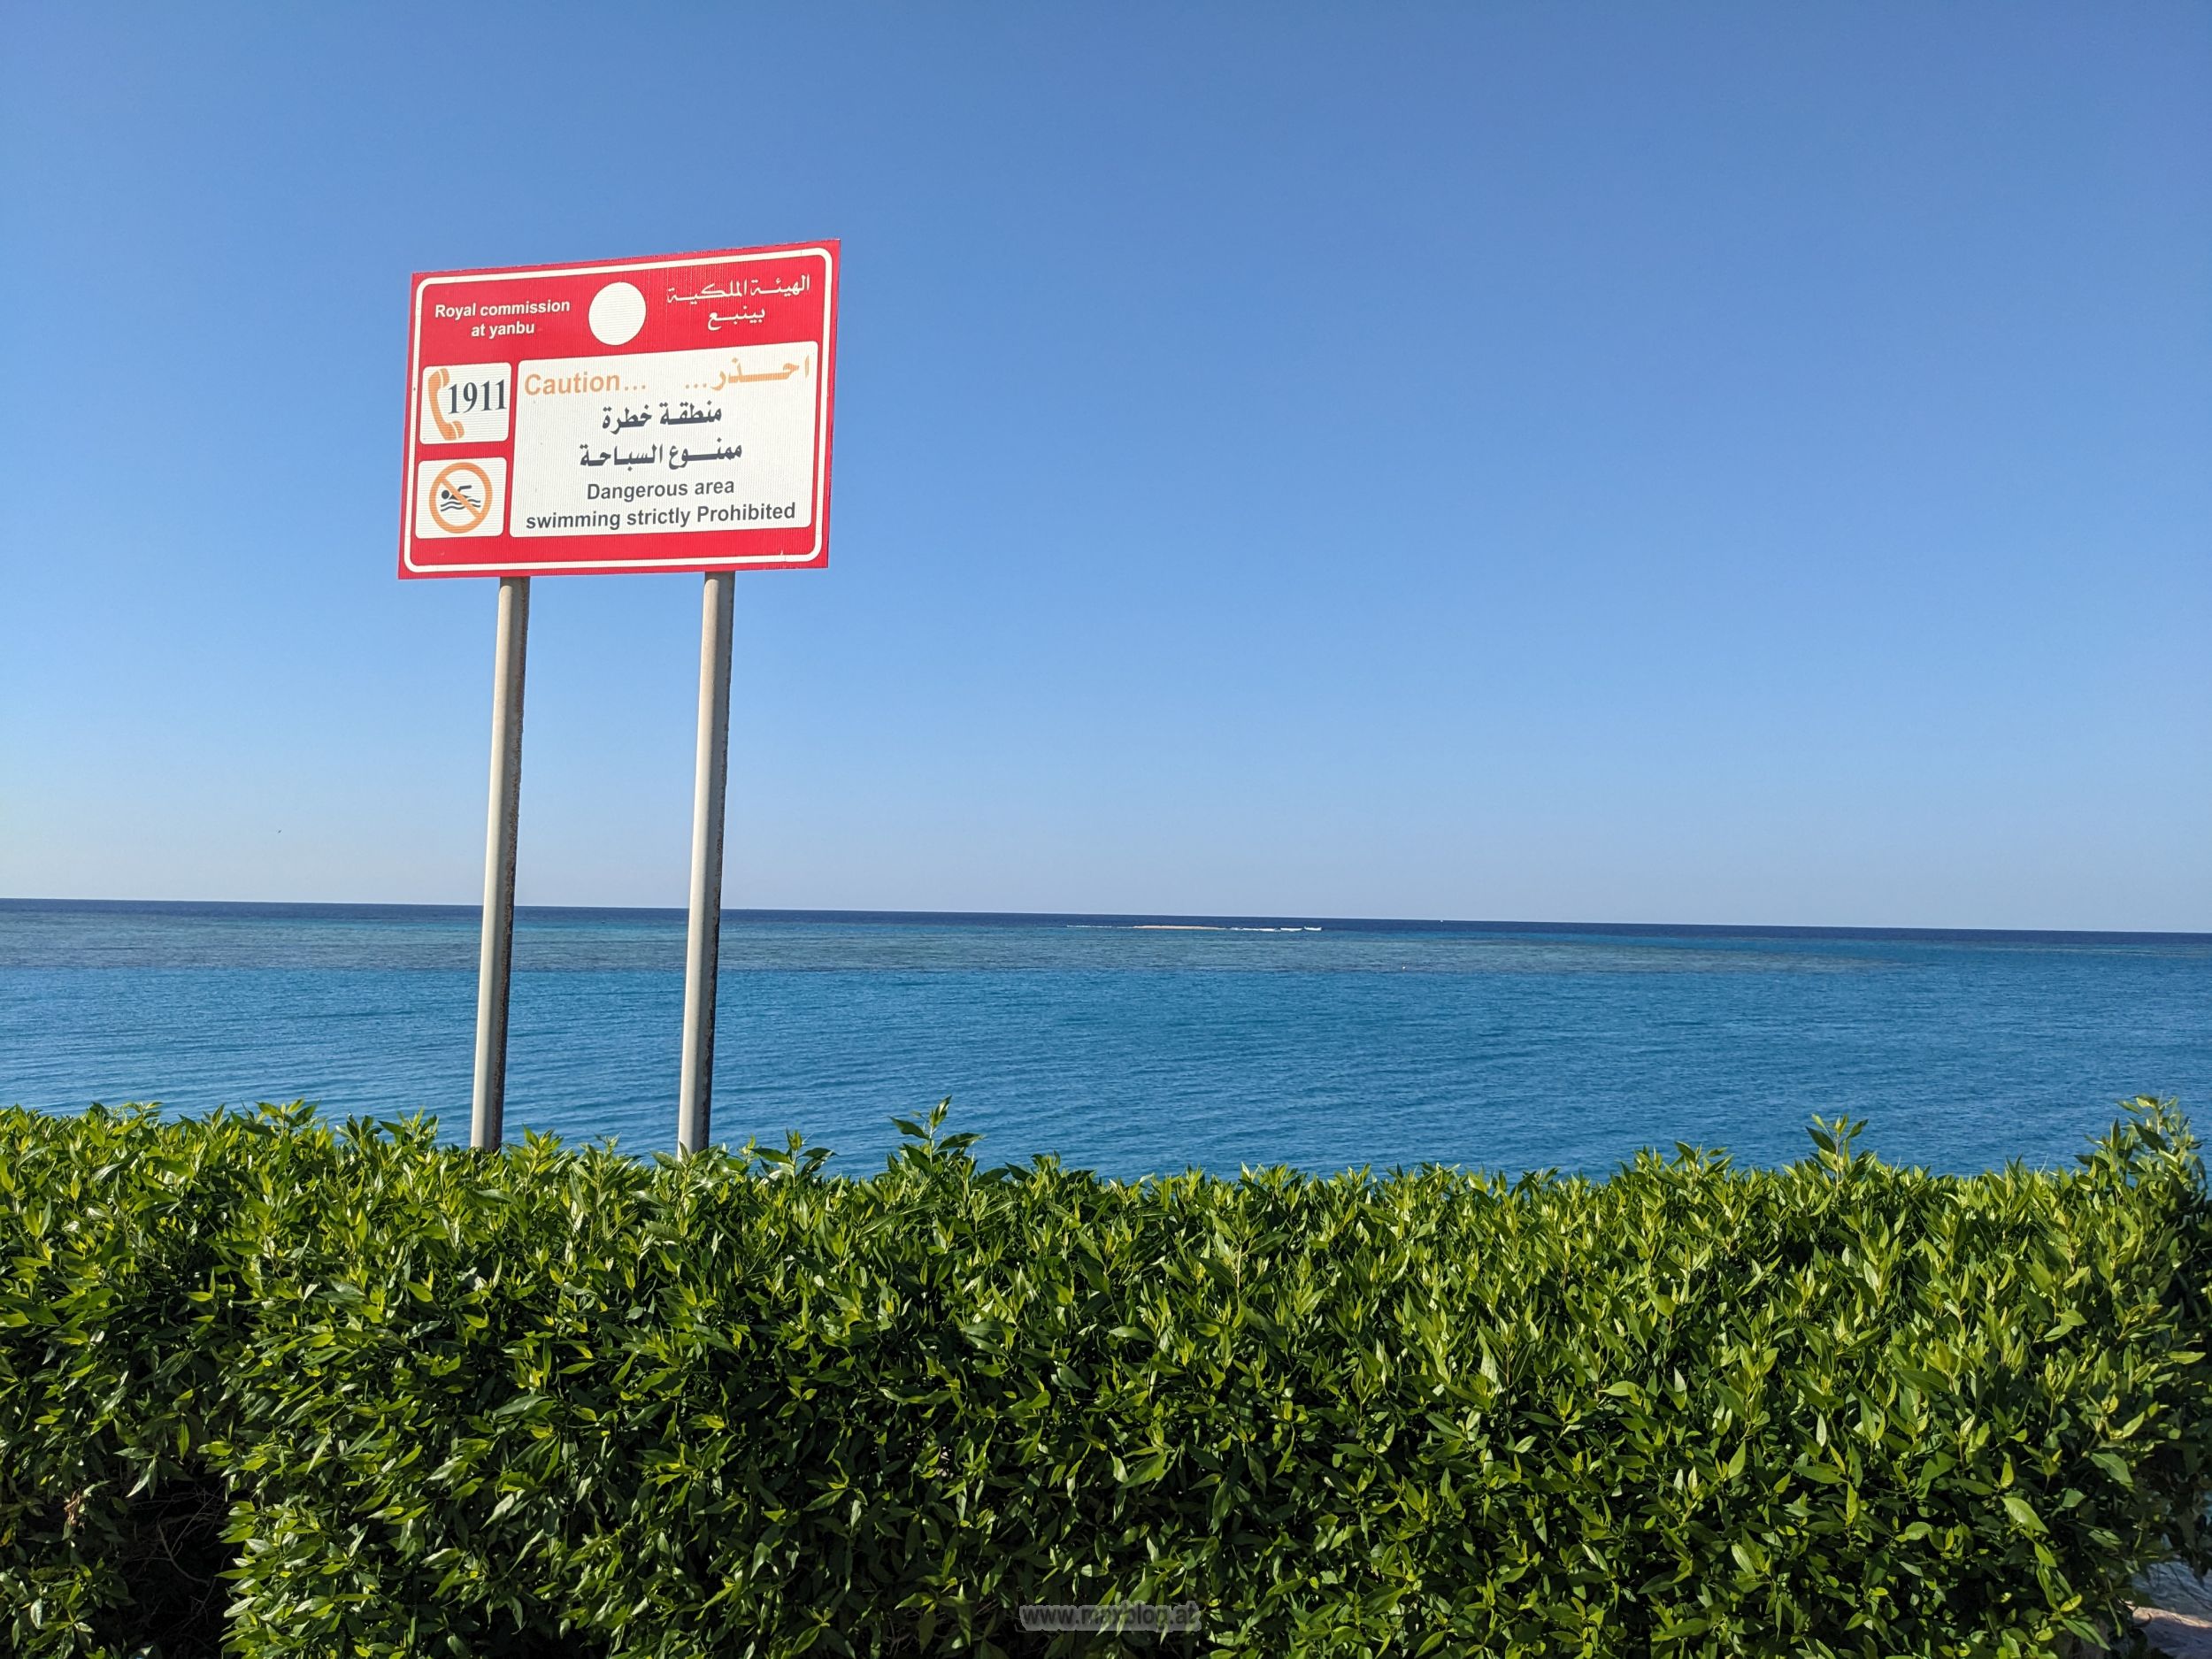 Swimming strictly prohibited